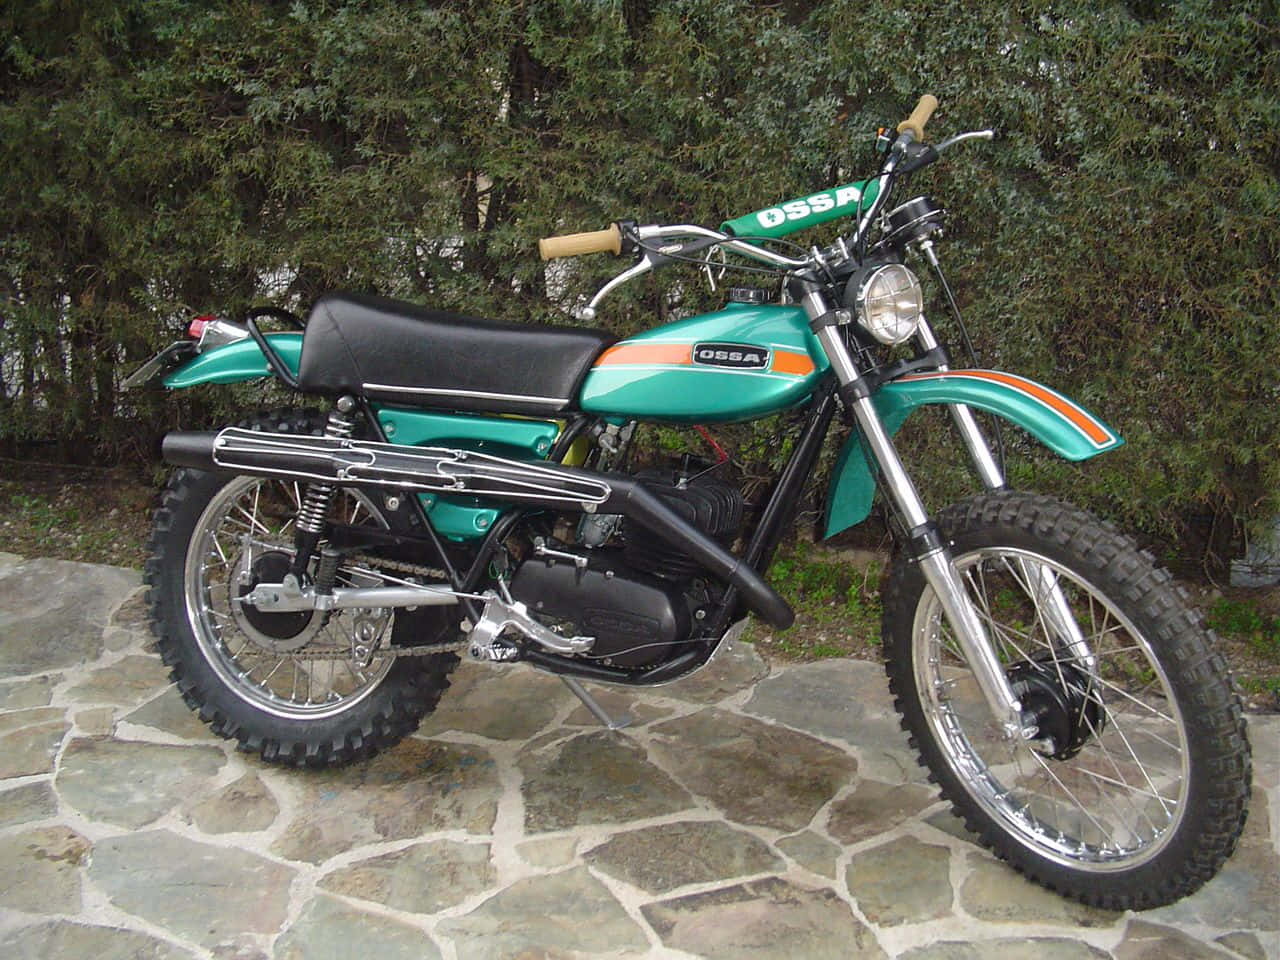 A Spectacular Shot Of Vintage Ossa Motorcycle Parked In The Great Outdoors Wallpaper